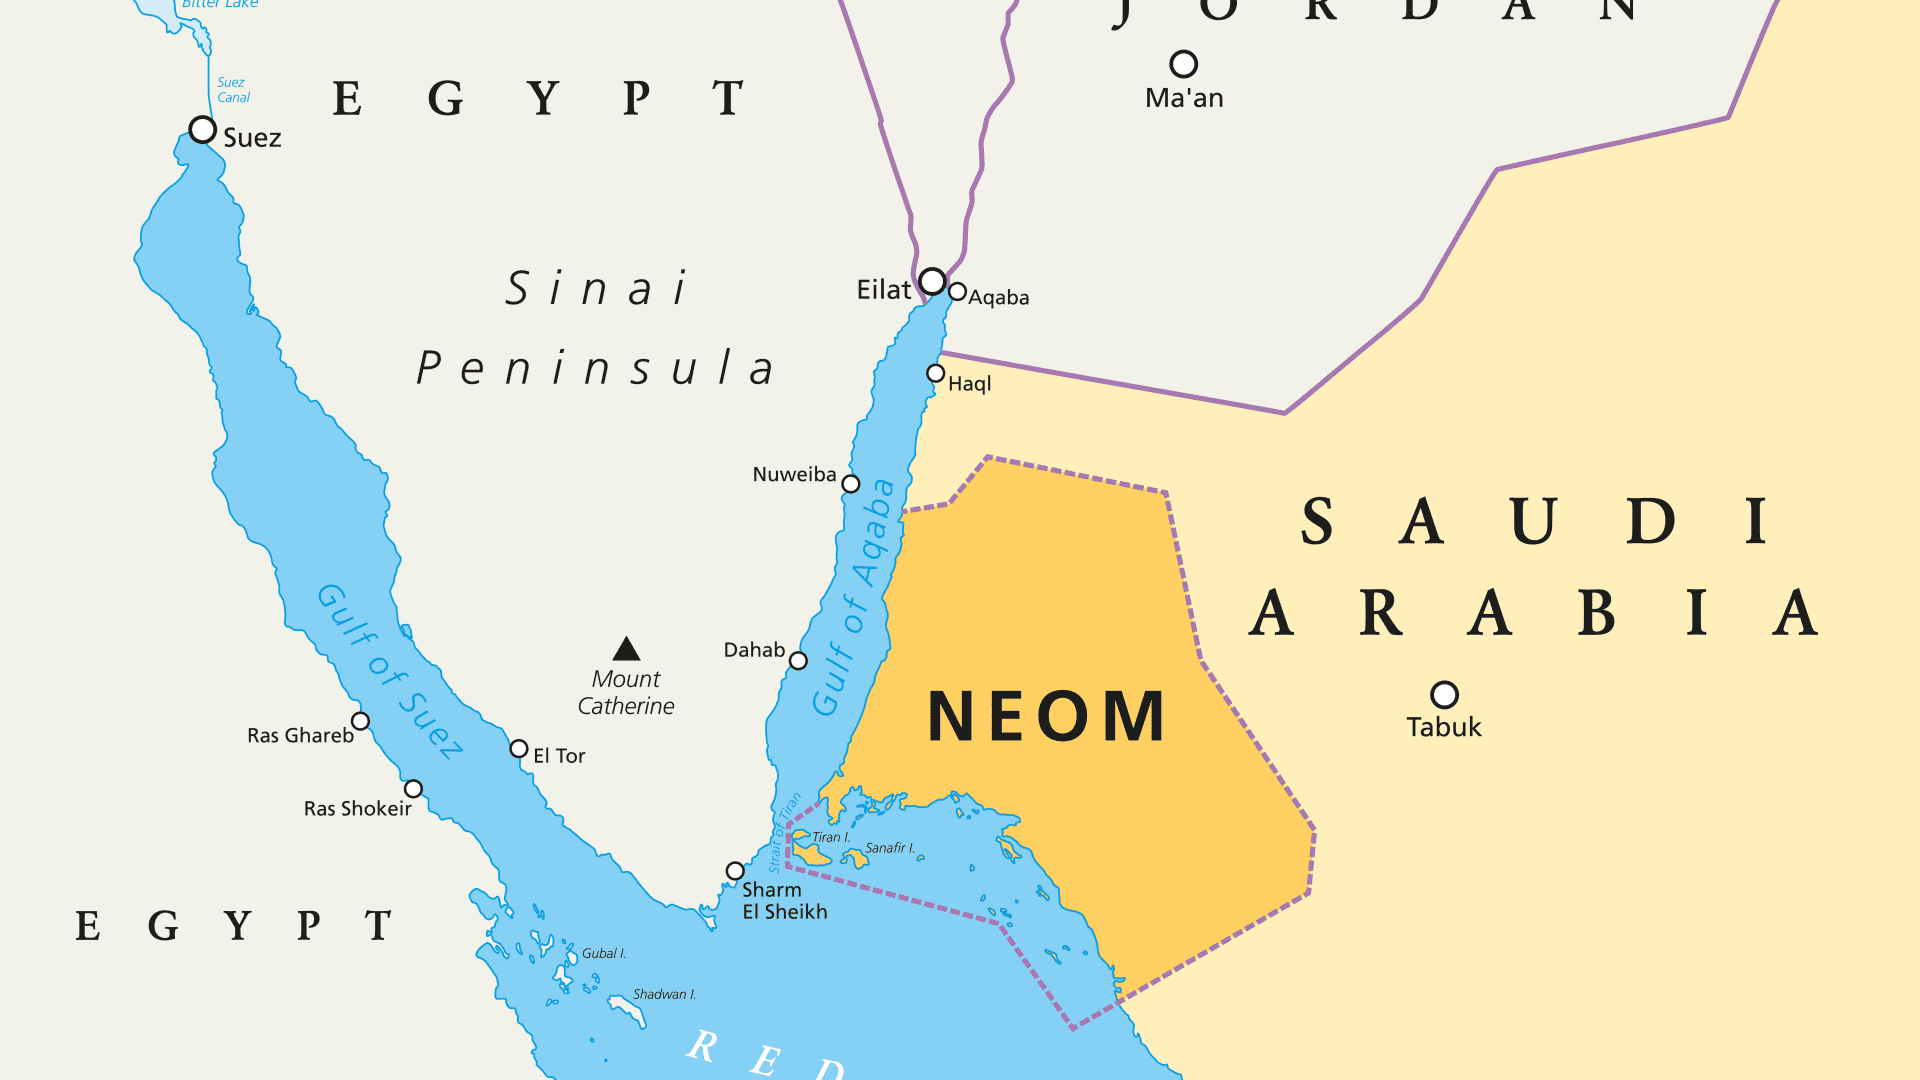 NEOM political map of the 500 billion dollar megacity project in Saudi Arabia along the Red Sea coast. Location of the smart and tourist city with autonomous judicial system. English labeling. Vector.